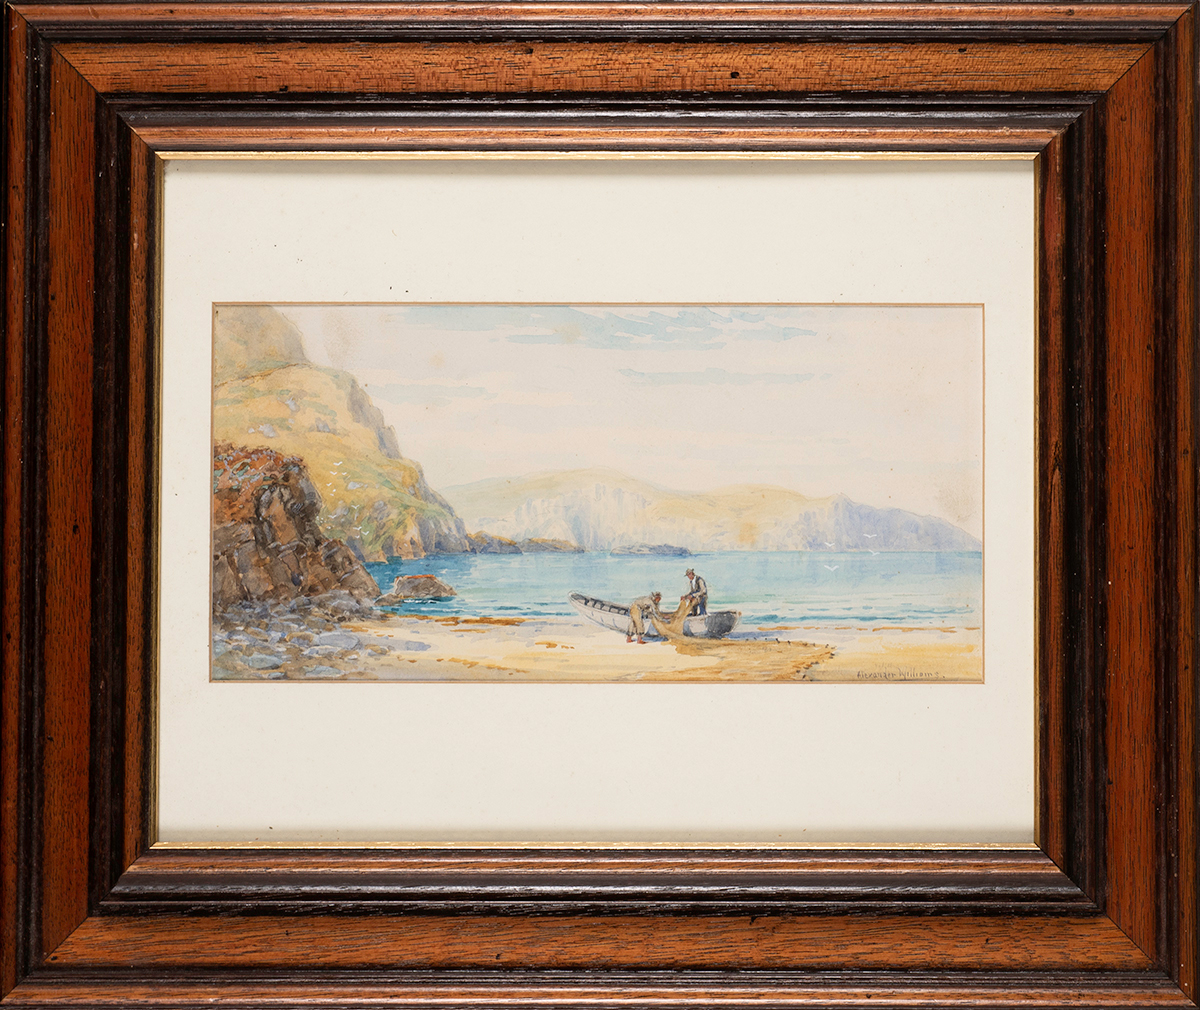 Alexander Williams RHA (1846-1930) ACHILL ISLAND, COUNTY MAYO watercolour signed lower right 5.75 by - Image 2 of 5